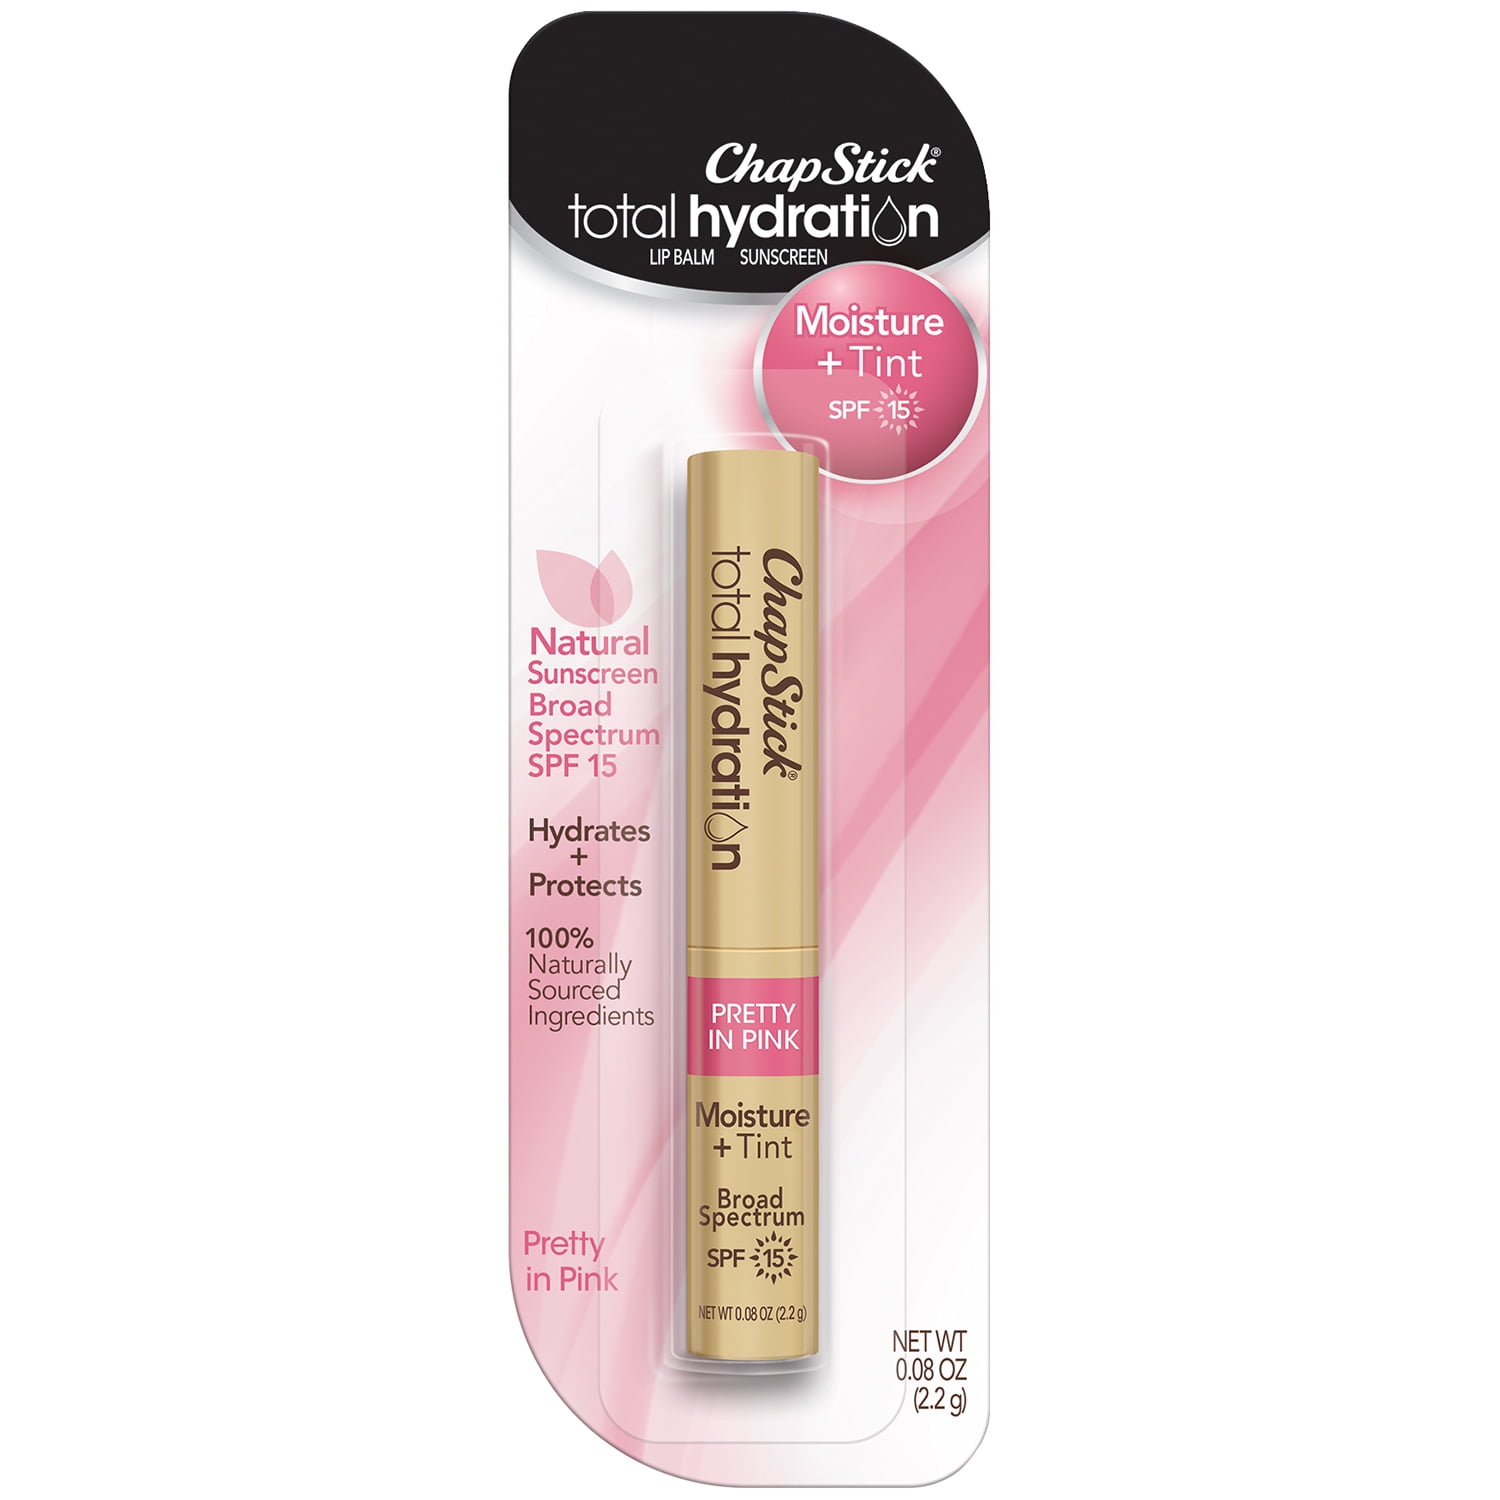 ChapStick Total Hydration Moisture + Tint SPF 15 Pretty in Pink lip balm to  protect and keep lips nourished and healthy looking, with natural